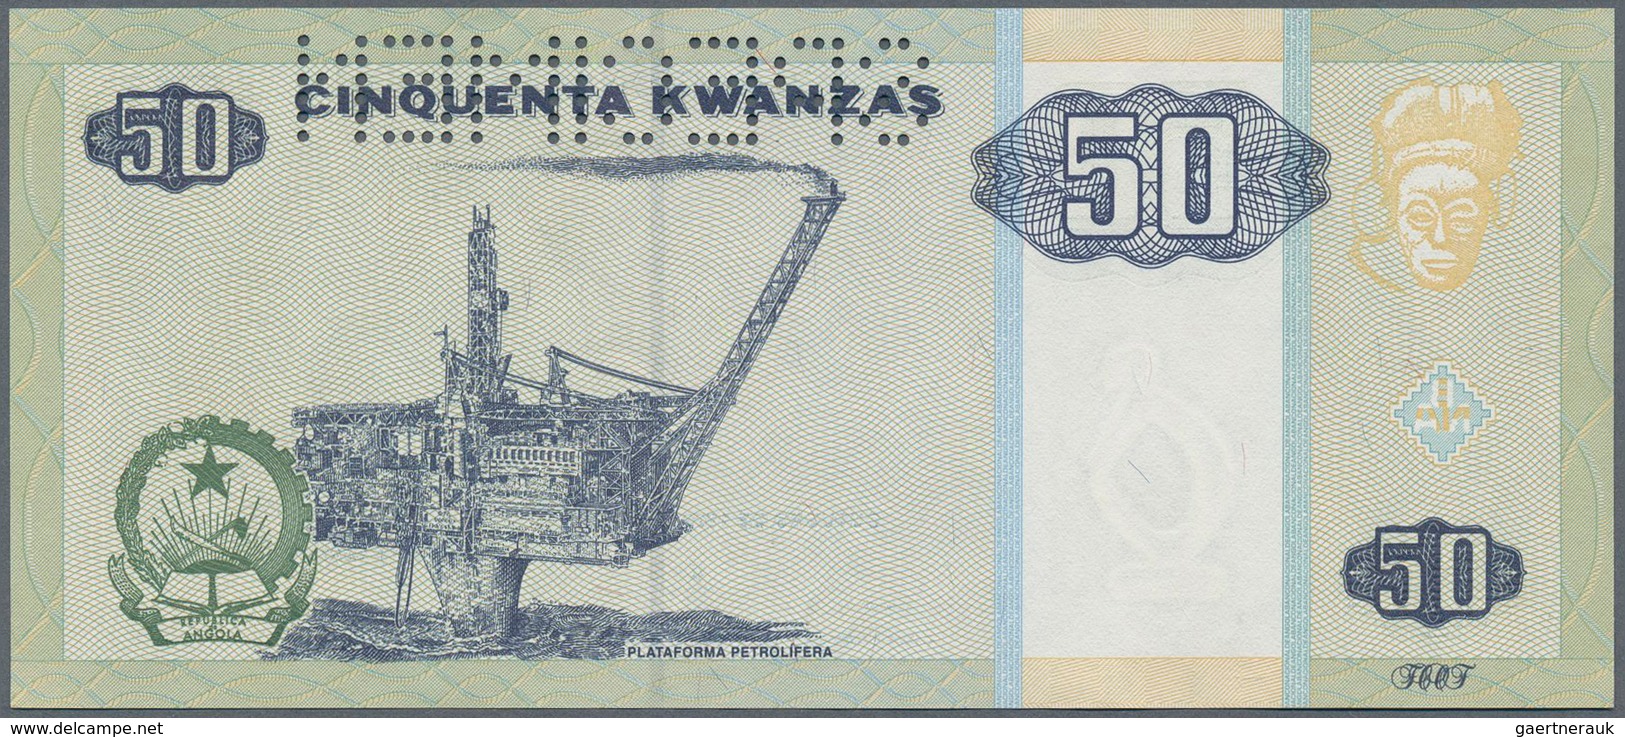 Angola: 50 Kwanzas 1999 Specimen P. 146as With Zero Serial Numbers, Specimen Perforation In Conditio - Angola